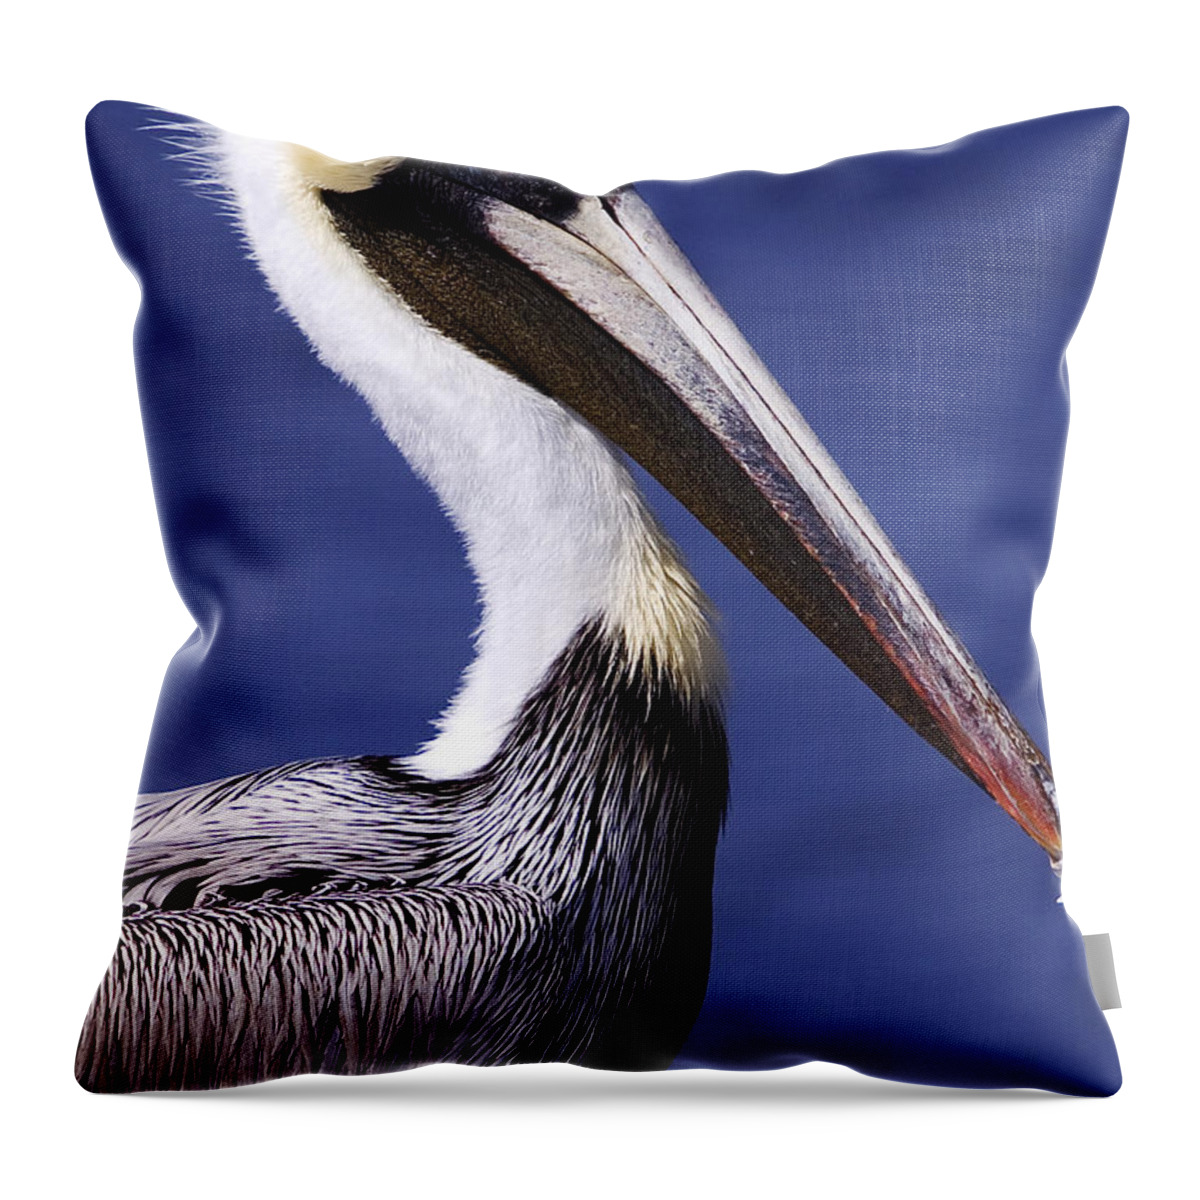 Southport Throw Pillow featuring the photograph Southport Pelican 2 by Nick Noble